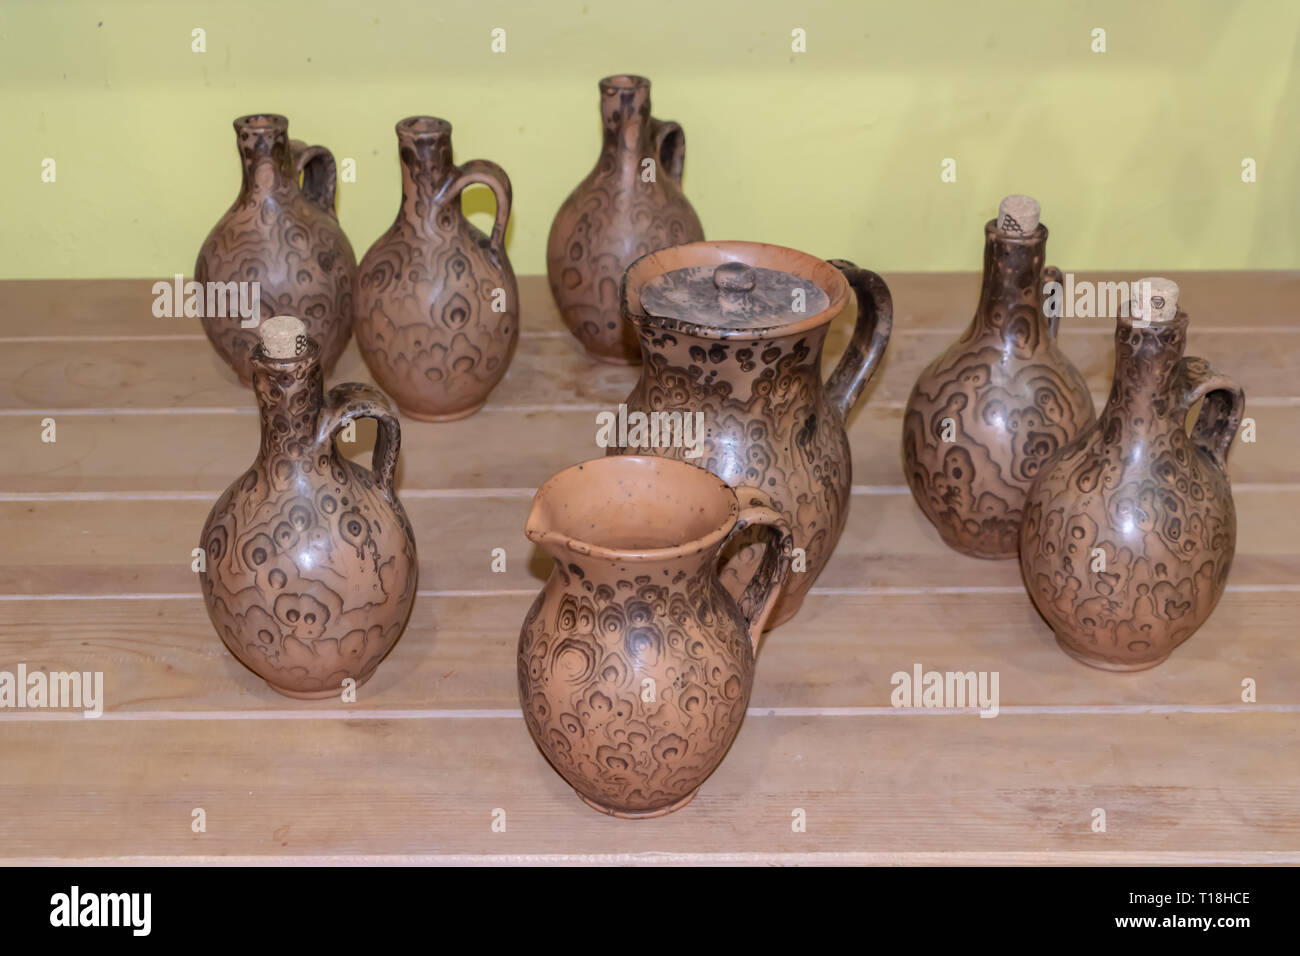 clay products, jugs cups liquid vessels, pottery Stock Photo